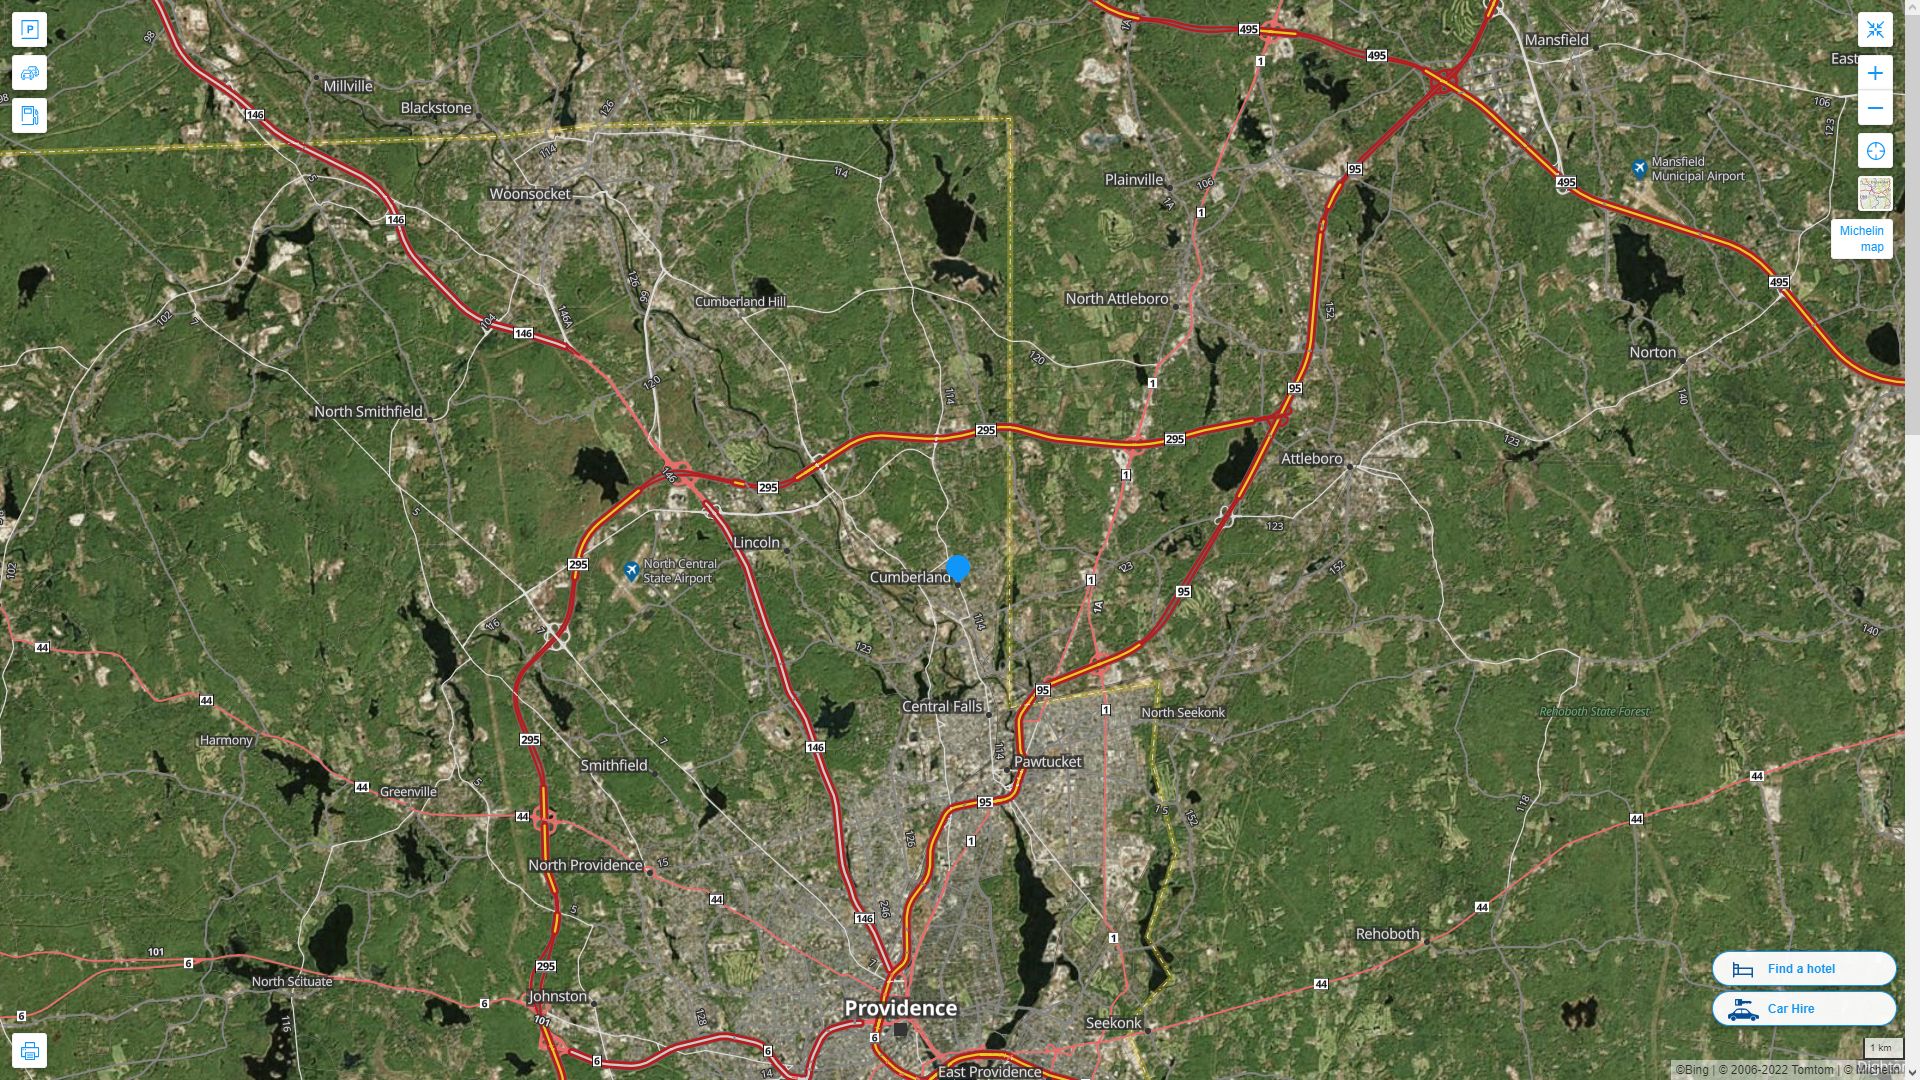 Cumberland Rhode Island Highway and Road Map with Satellite View